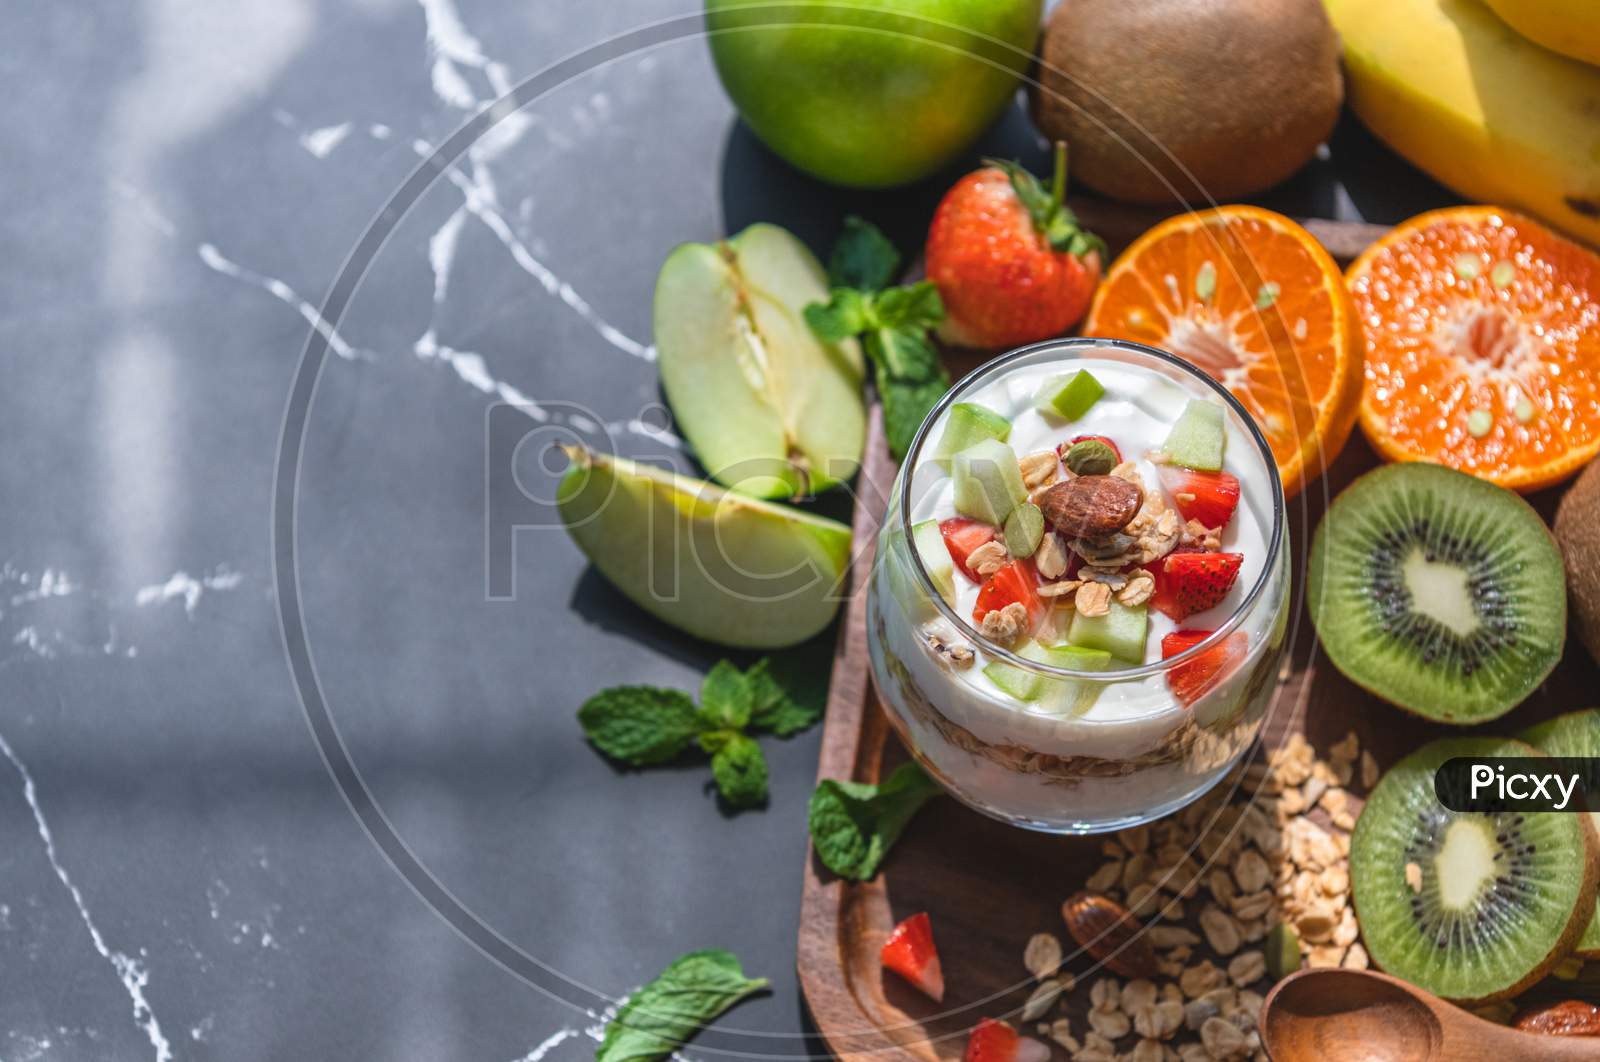 Closeup Nutrition Yogurt With Many Fruits On Table. Food Cuisine And Drinks Concept. Organic Dessert Theme.